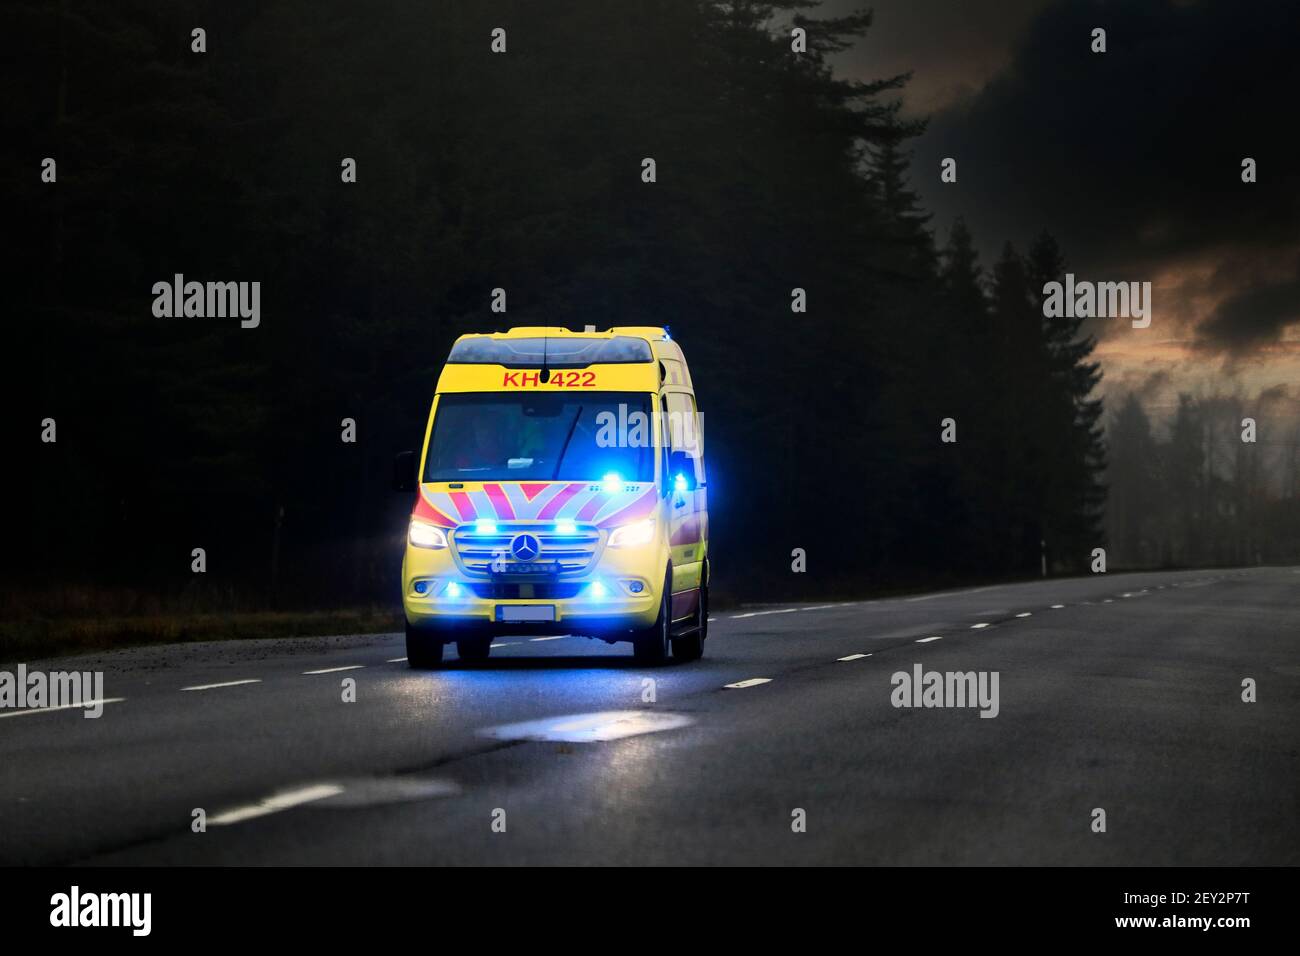 Ambulance on emergency call with blue lights flashing on the dark road at night. Marttila, Finland. October 30, 2020. Stock Photo